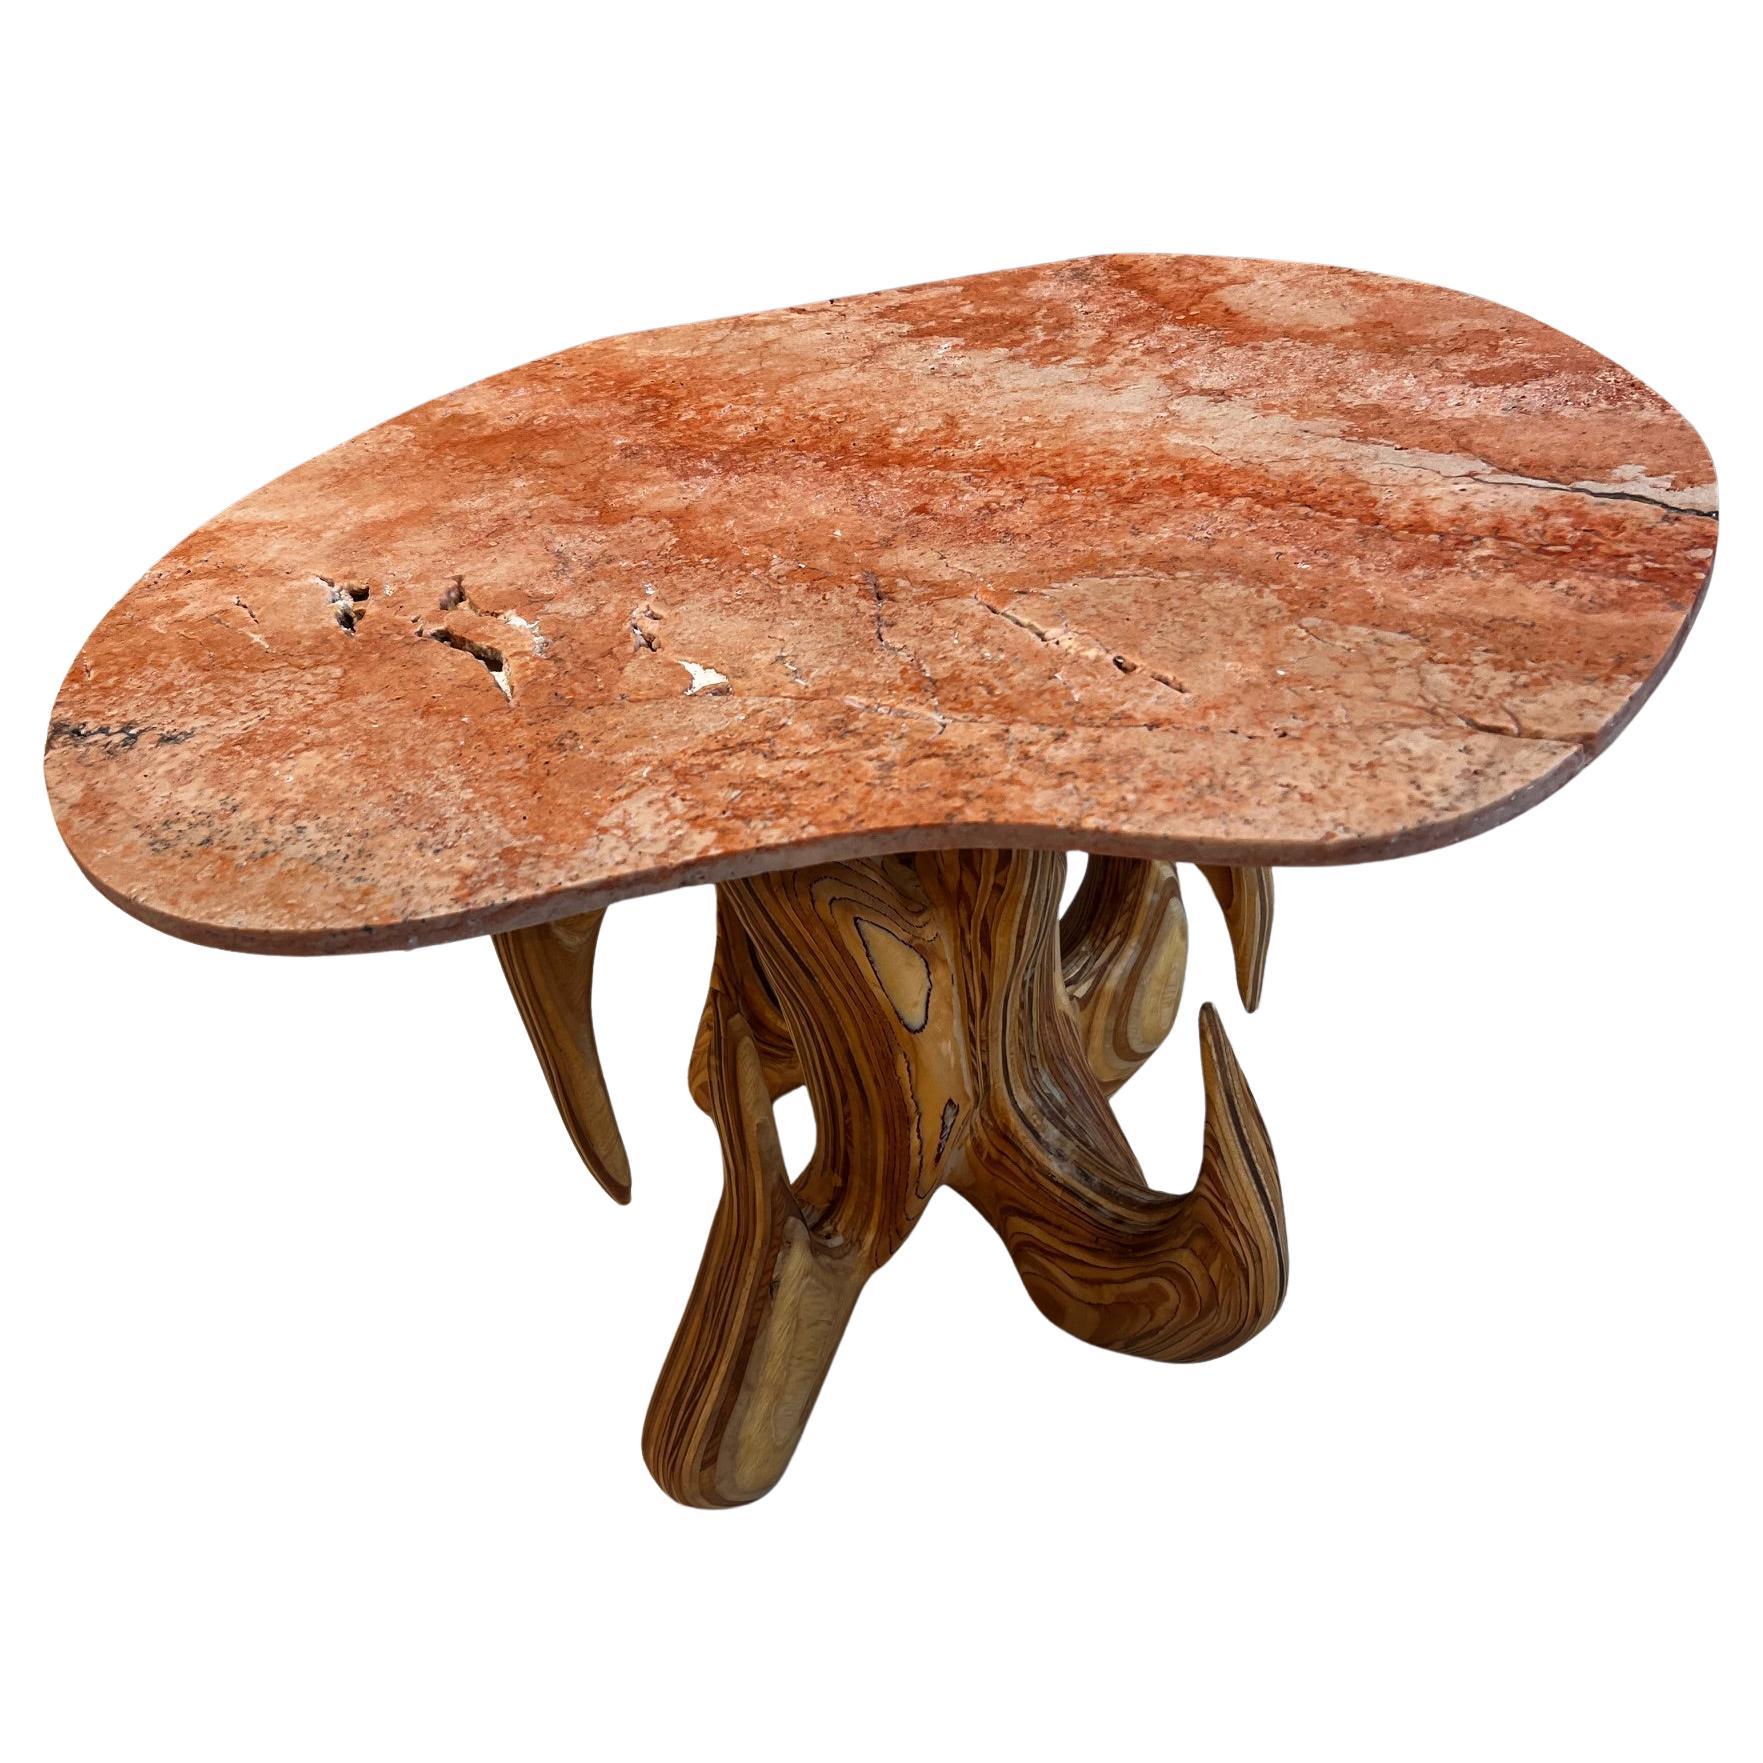 Limited edition side table with tumbled Antique Rouge marble top and sculpted base from layered maple plywood